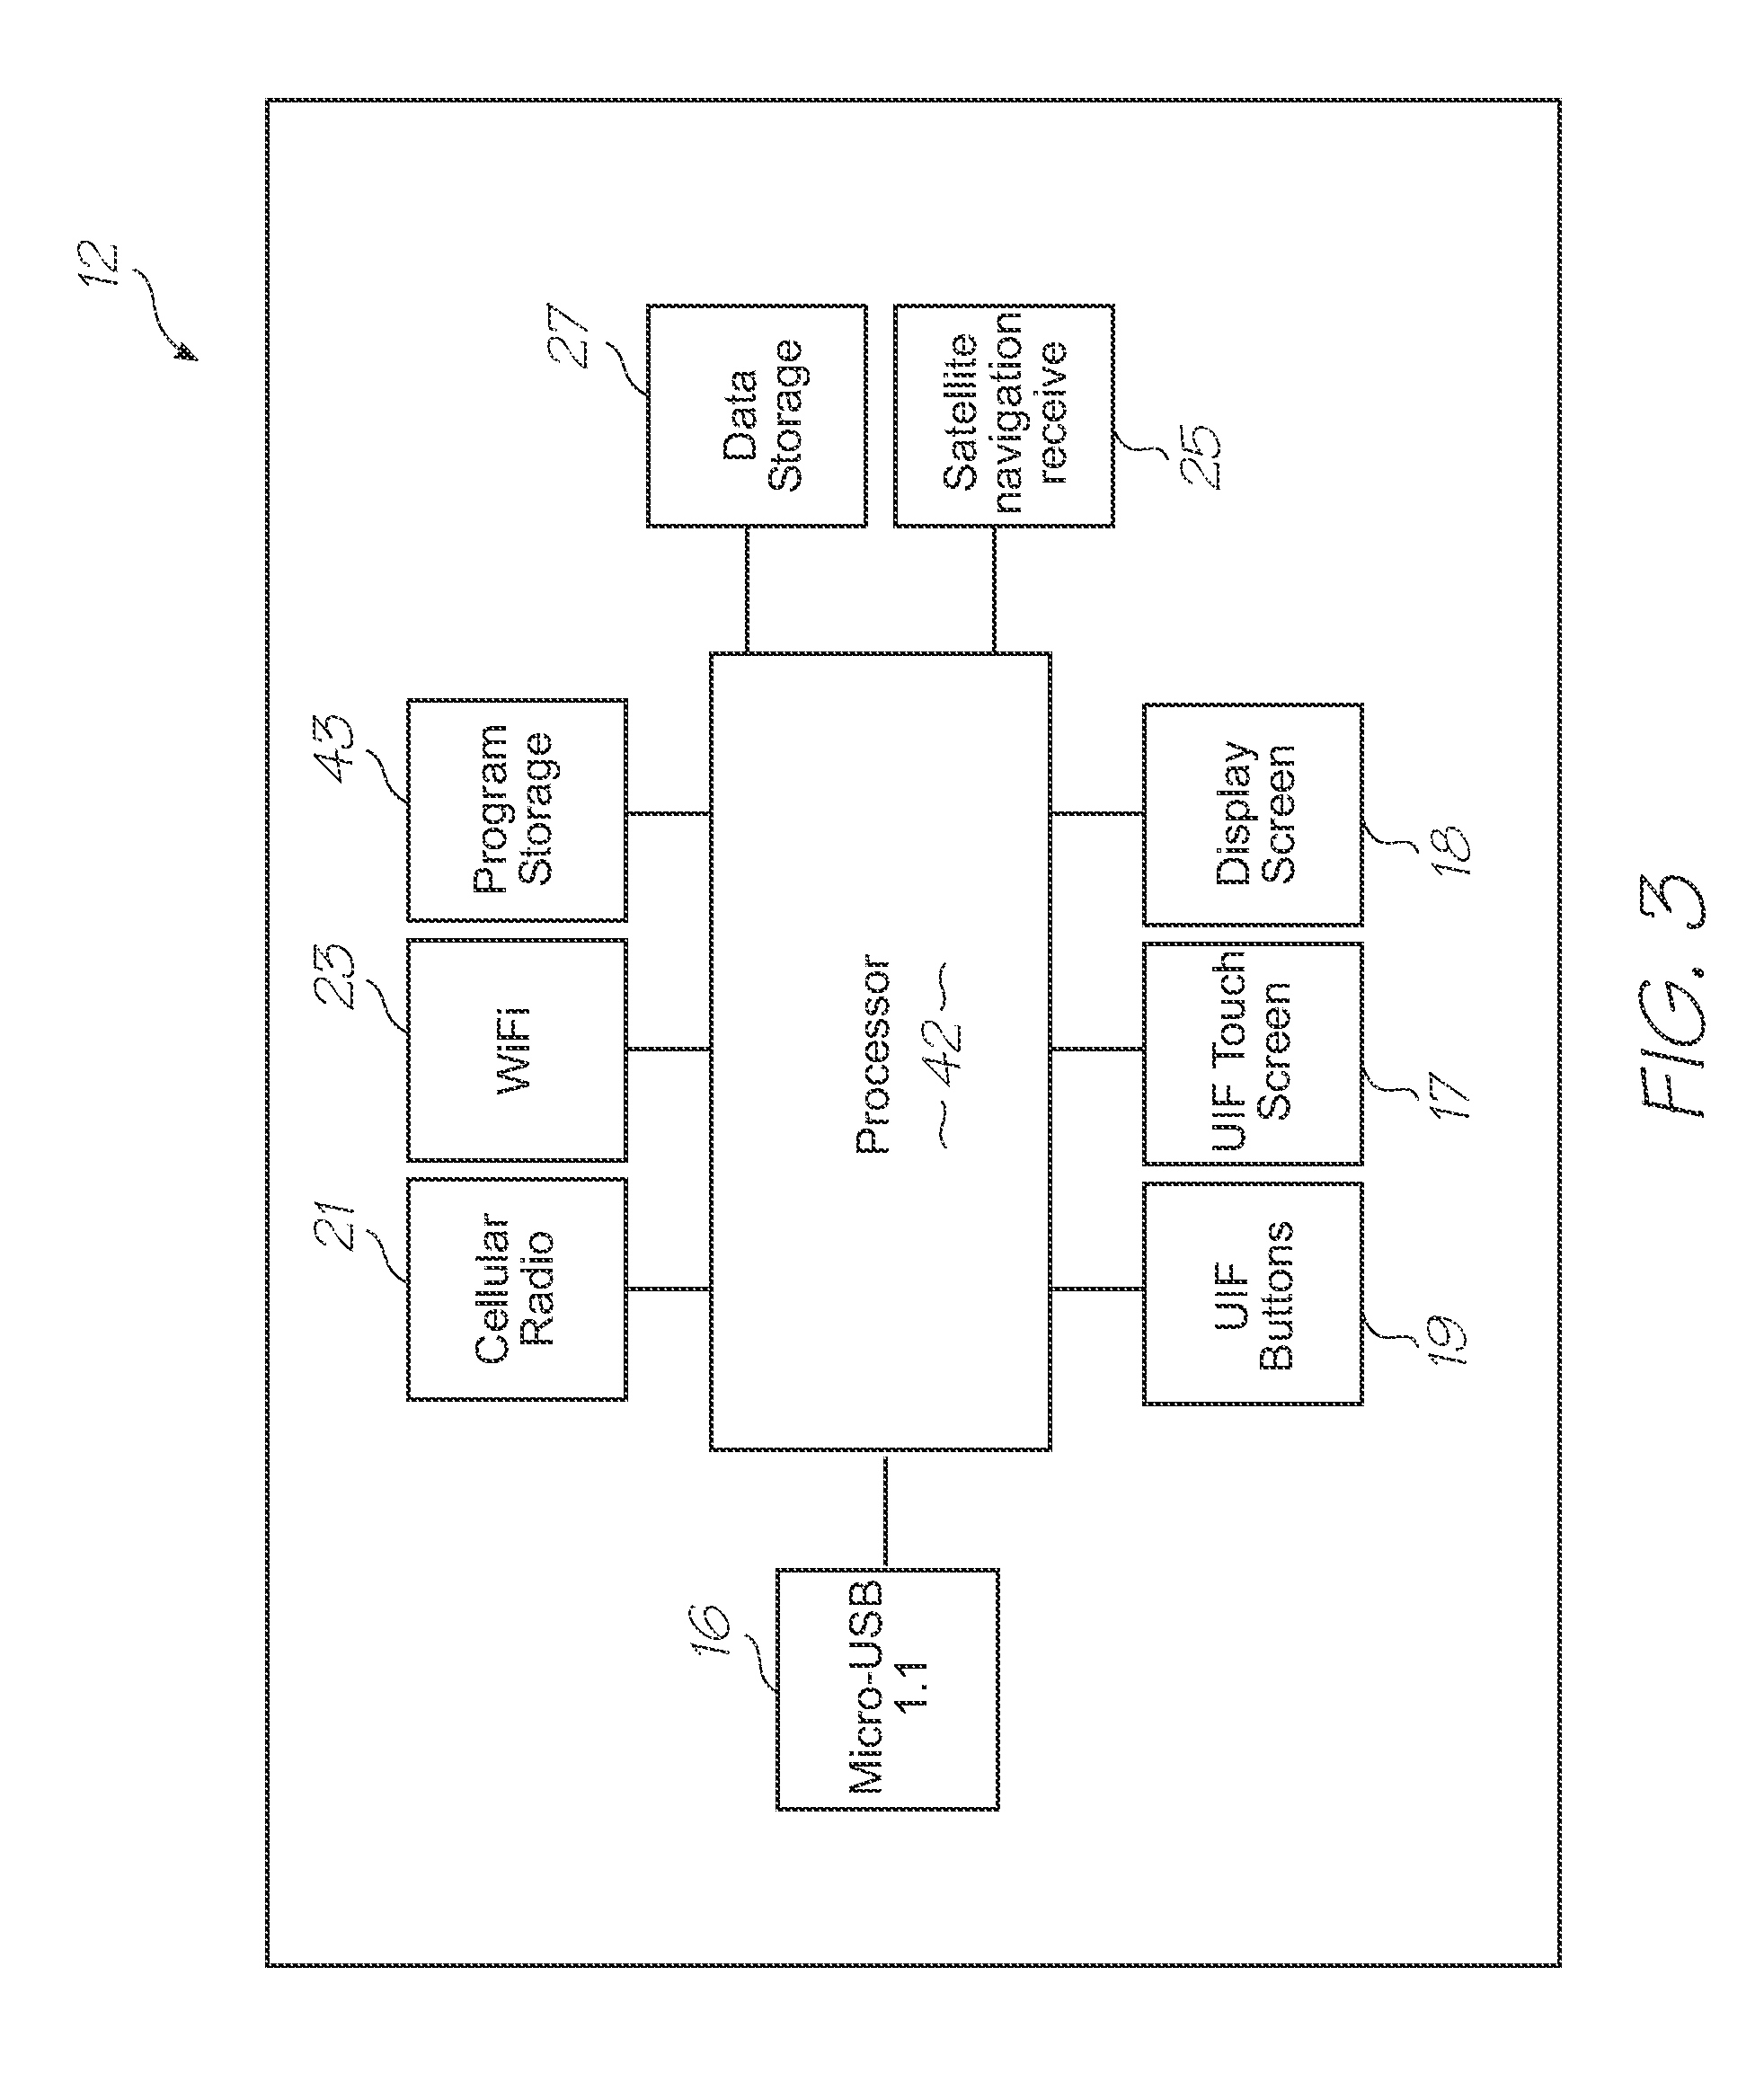 Loc device with parallel nucleic acid amplification functionality